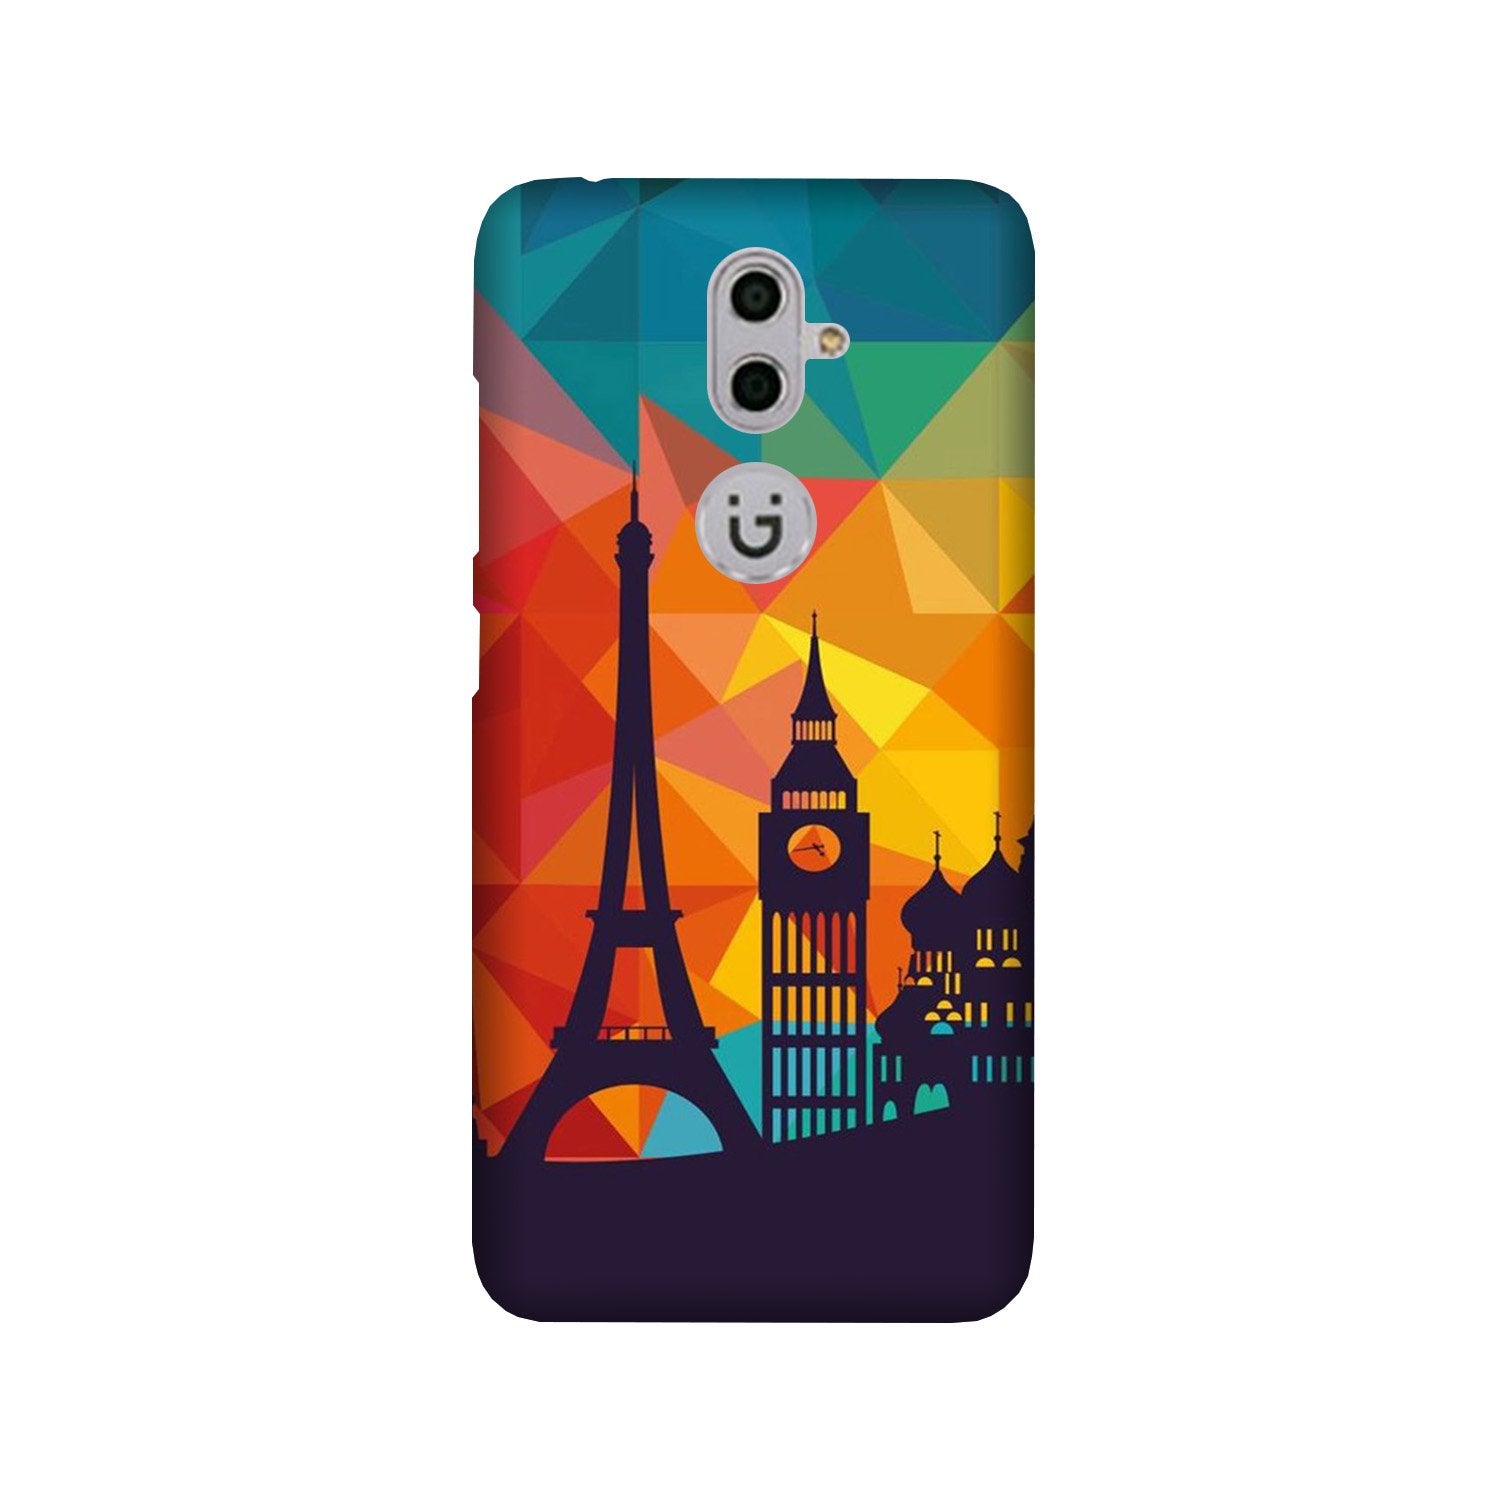 Eiffel Tower2 Case for Gionee S9